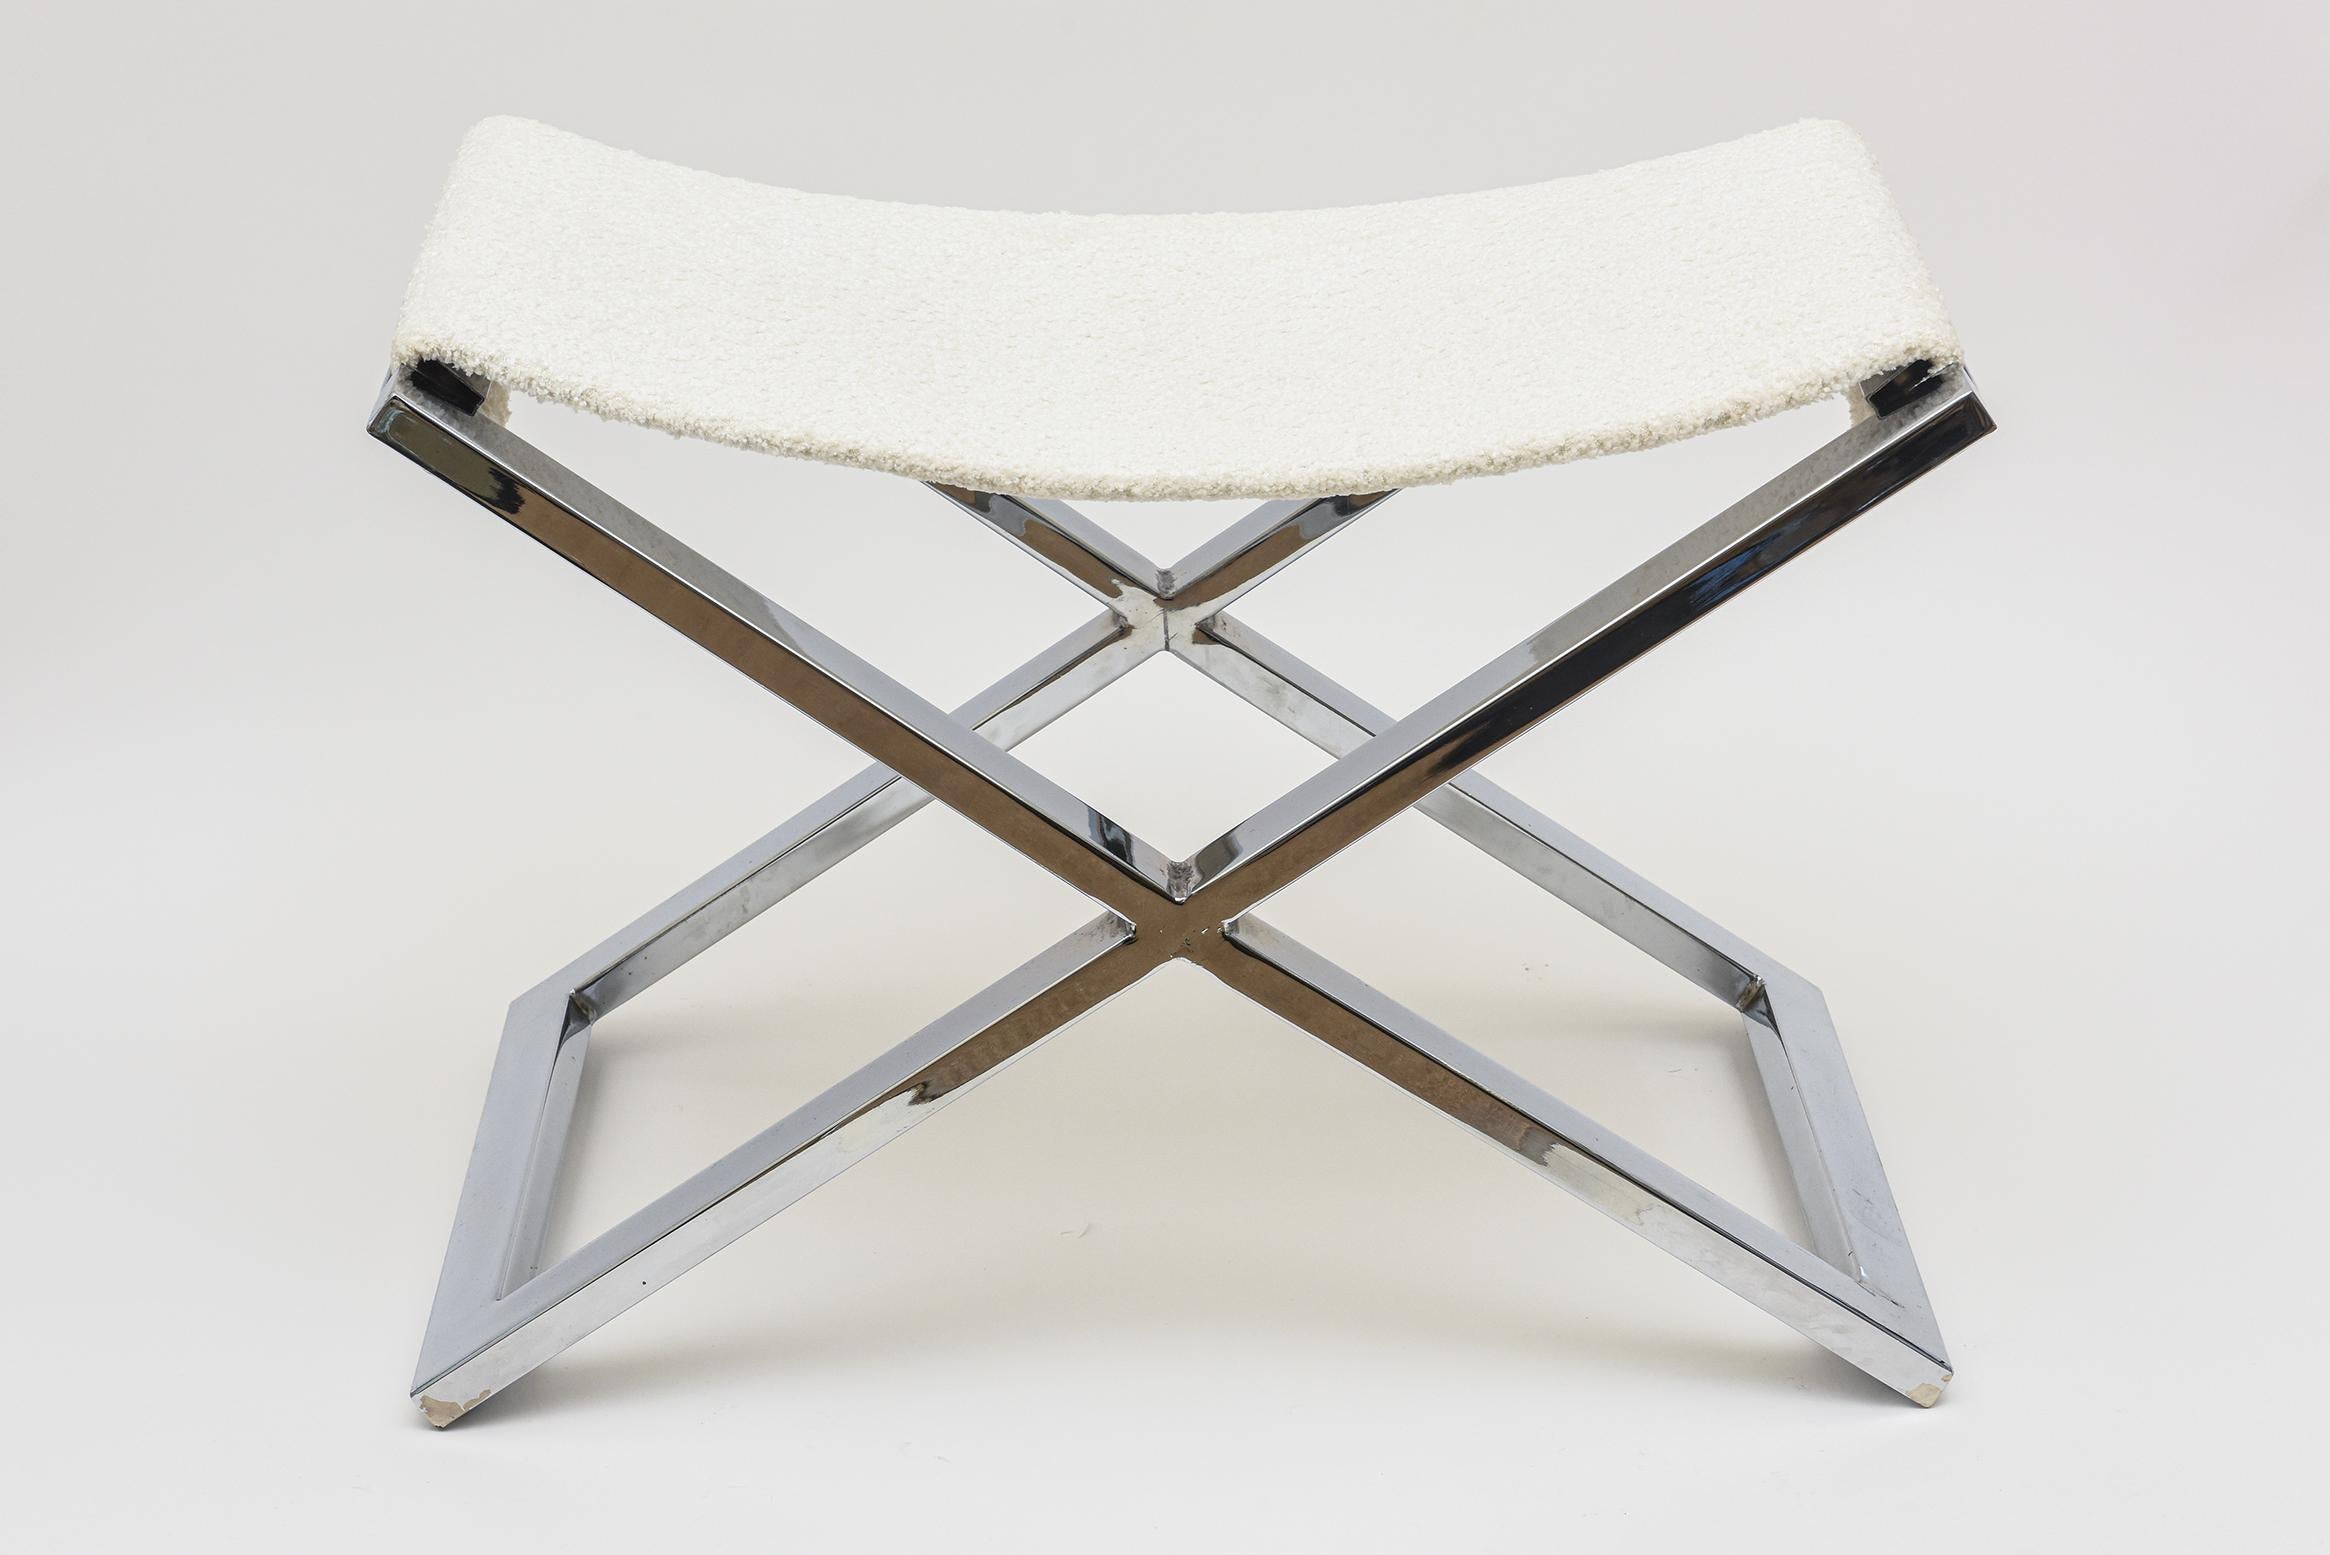 This lovely vintage chromed steel X frame bench is from the 80's and has been re-upholstered in an off white boucle fabric for the top as a sling seat. It remains modern and it has endless purposes for many rooms in your home. Masculine or feminine